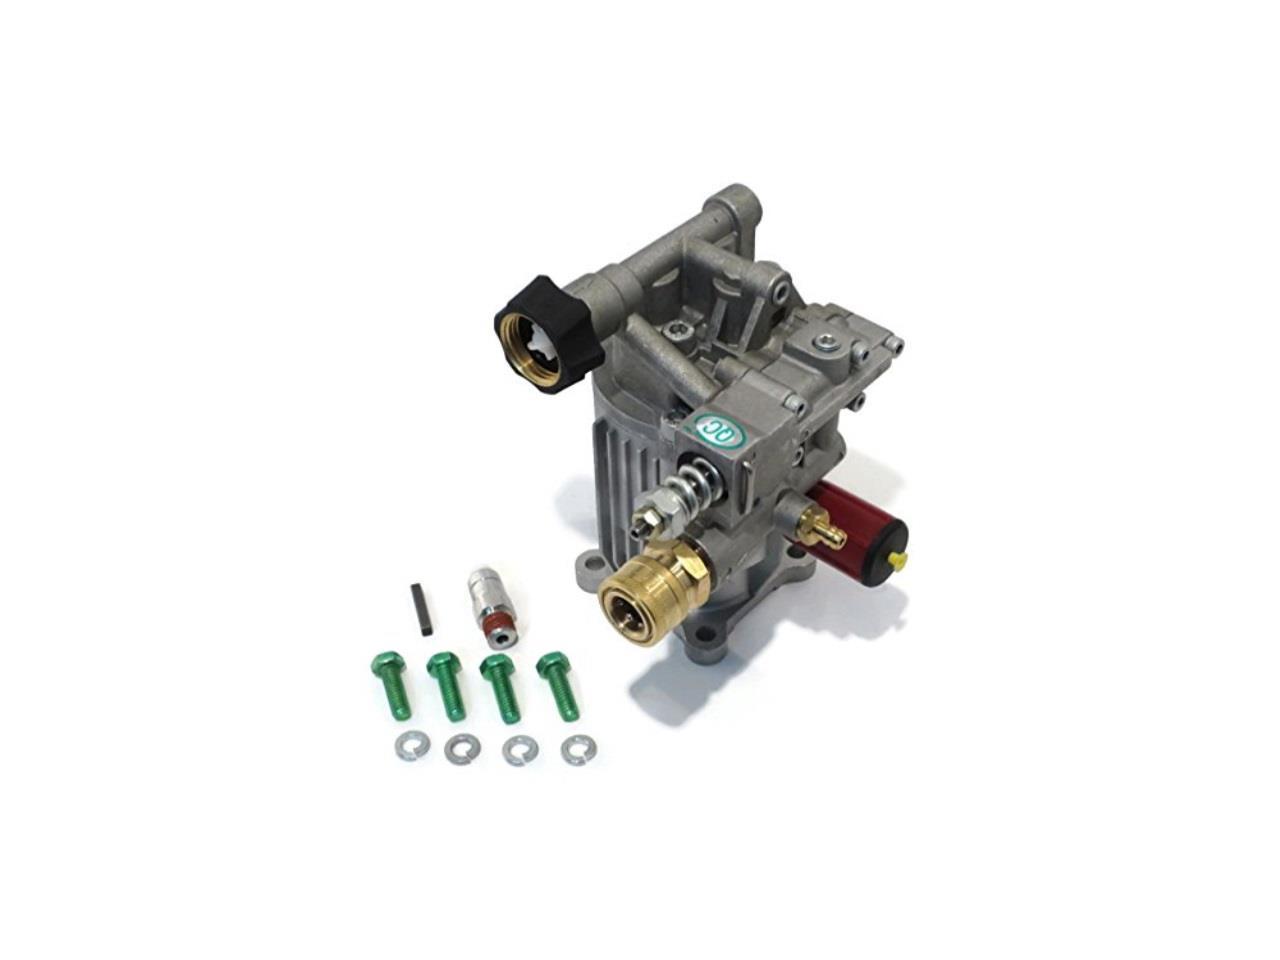 New PRESSURE WASHER PUMP Replaces D27938,XC2600 XR2500 EXCELL DEVILBISS XR2625 